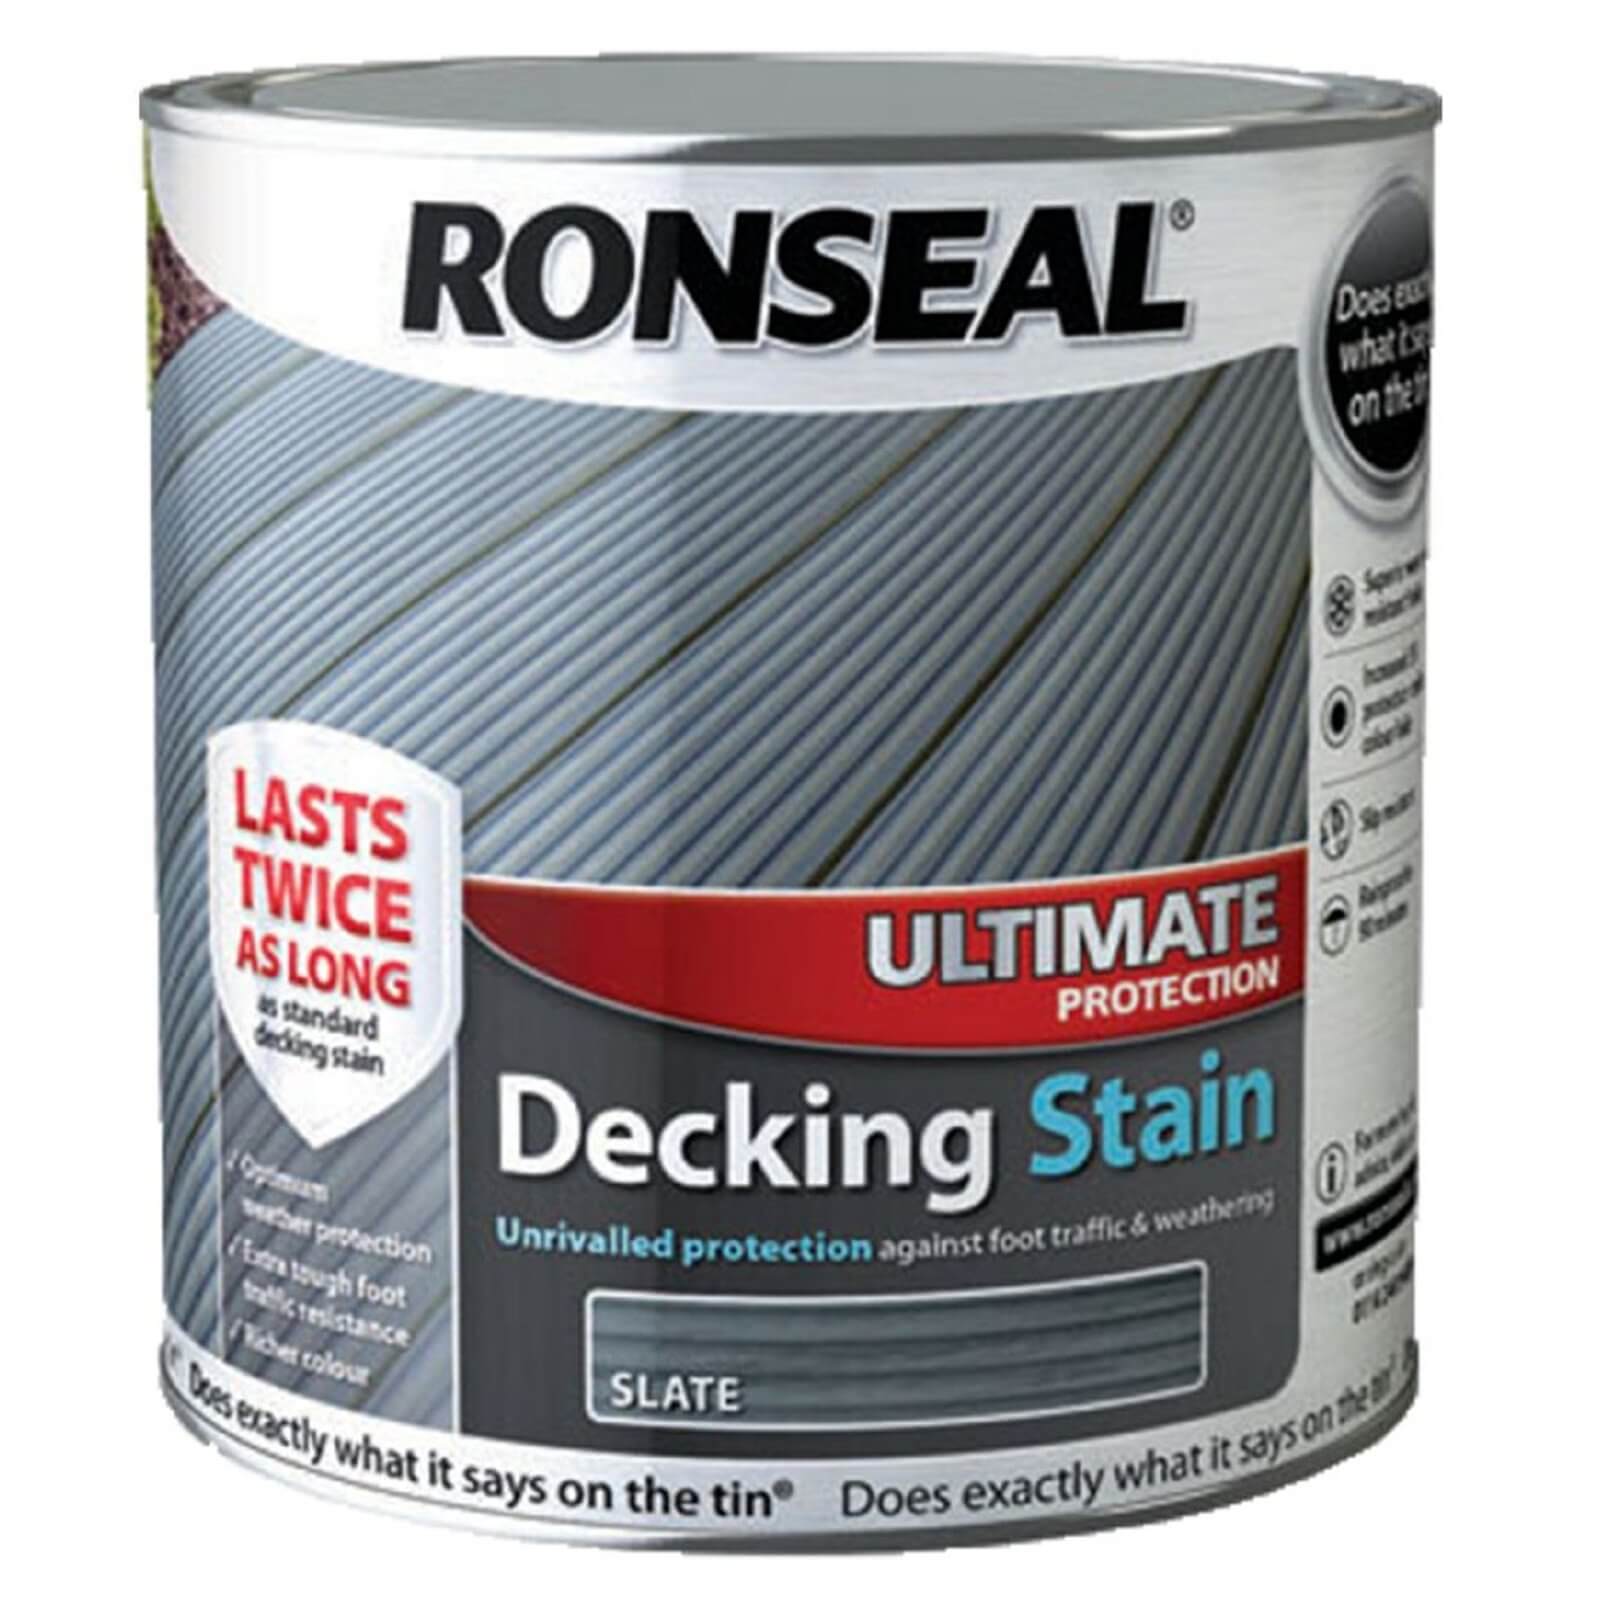 RONSEAL ULT PROTECTION DECK STAIN SLATE